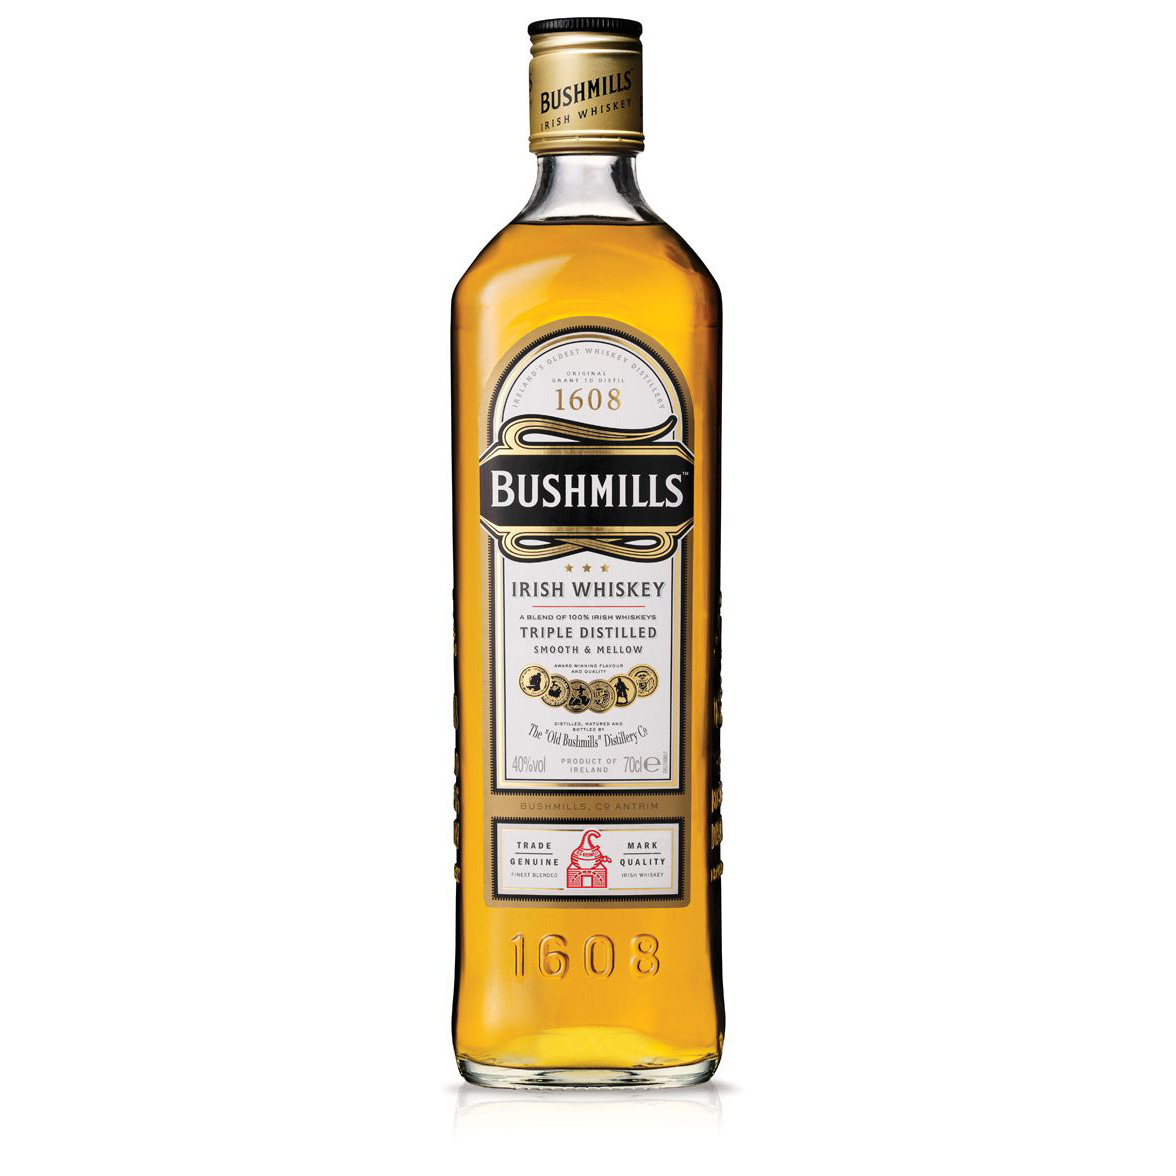 Buy For Home Delivery Bushmills Irish Whiskey Online Now